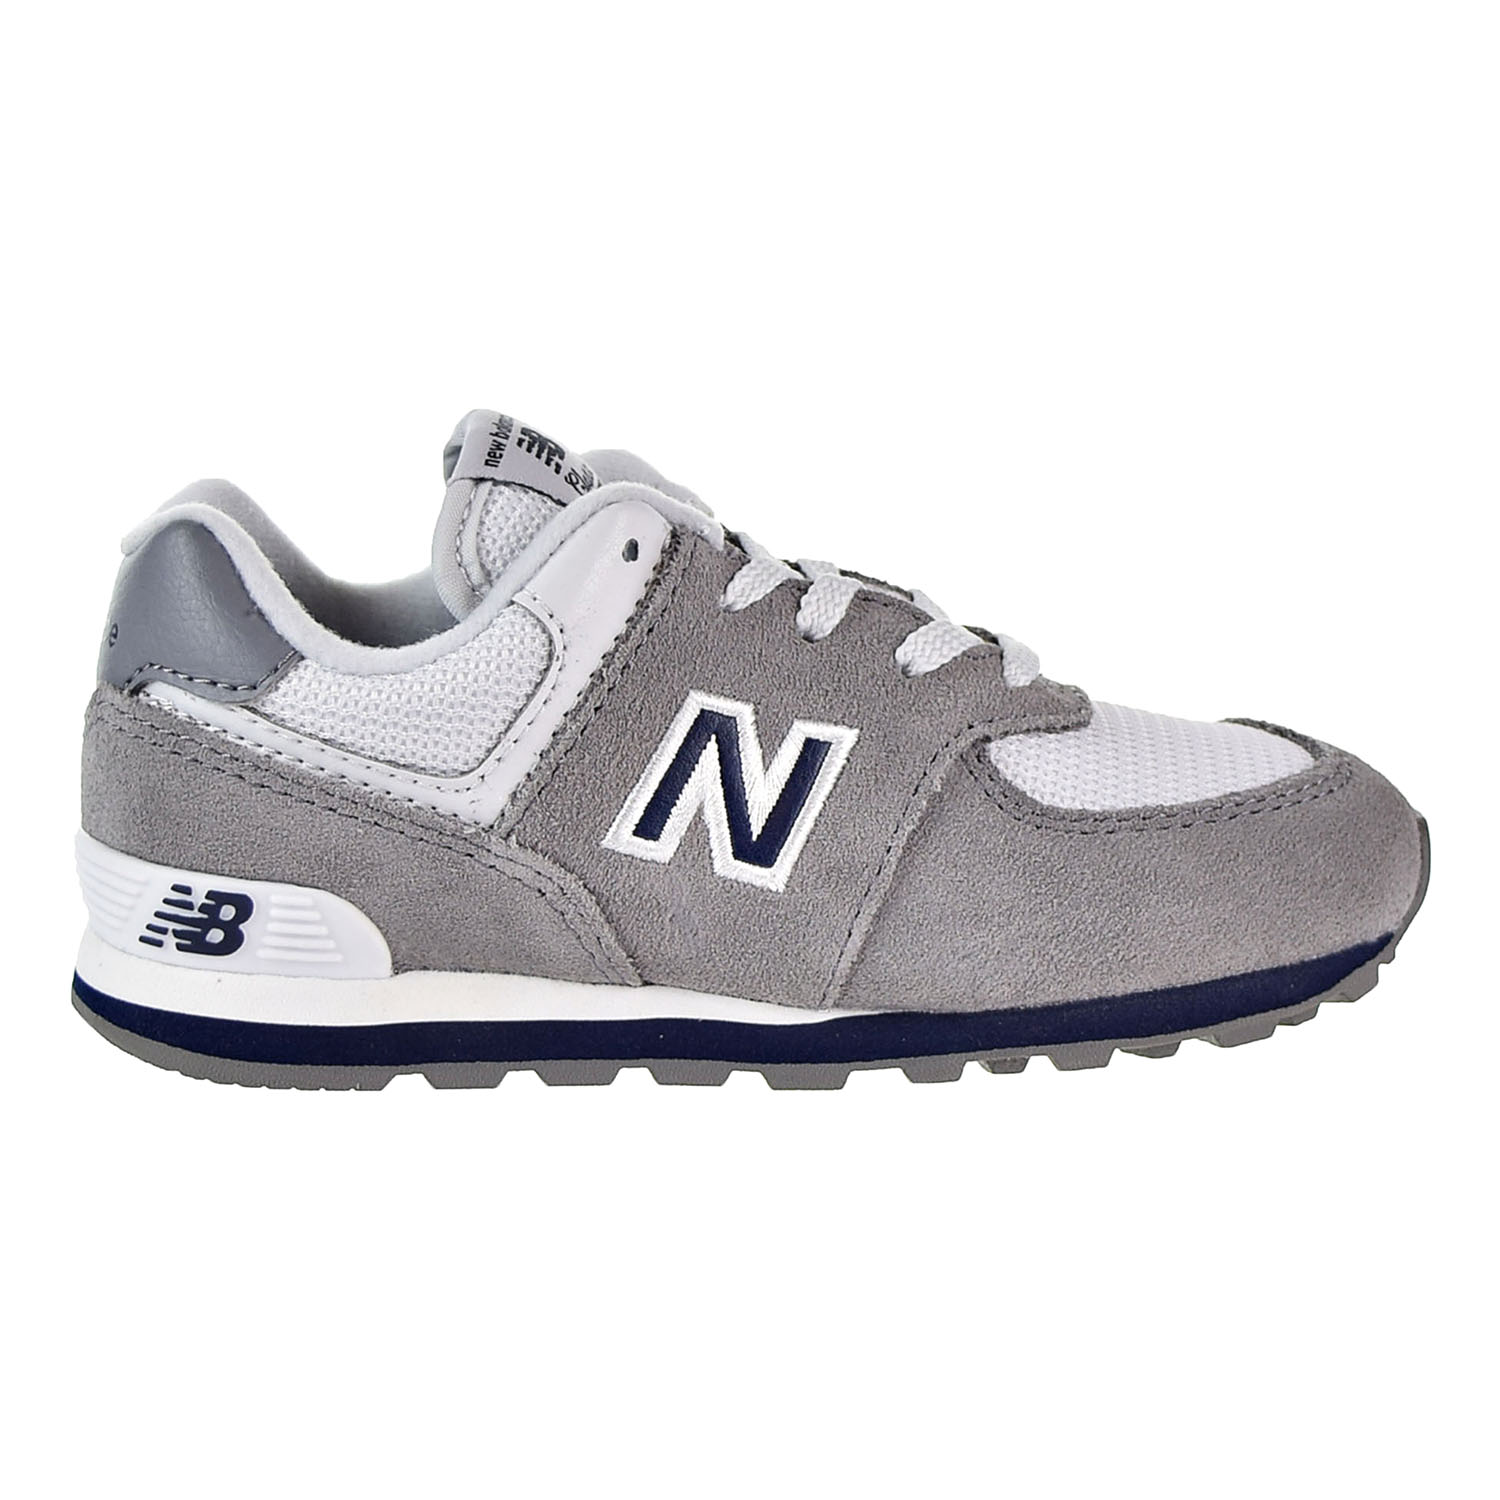 new balance 574 boys' infant and toddler sneaker